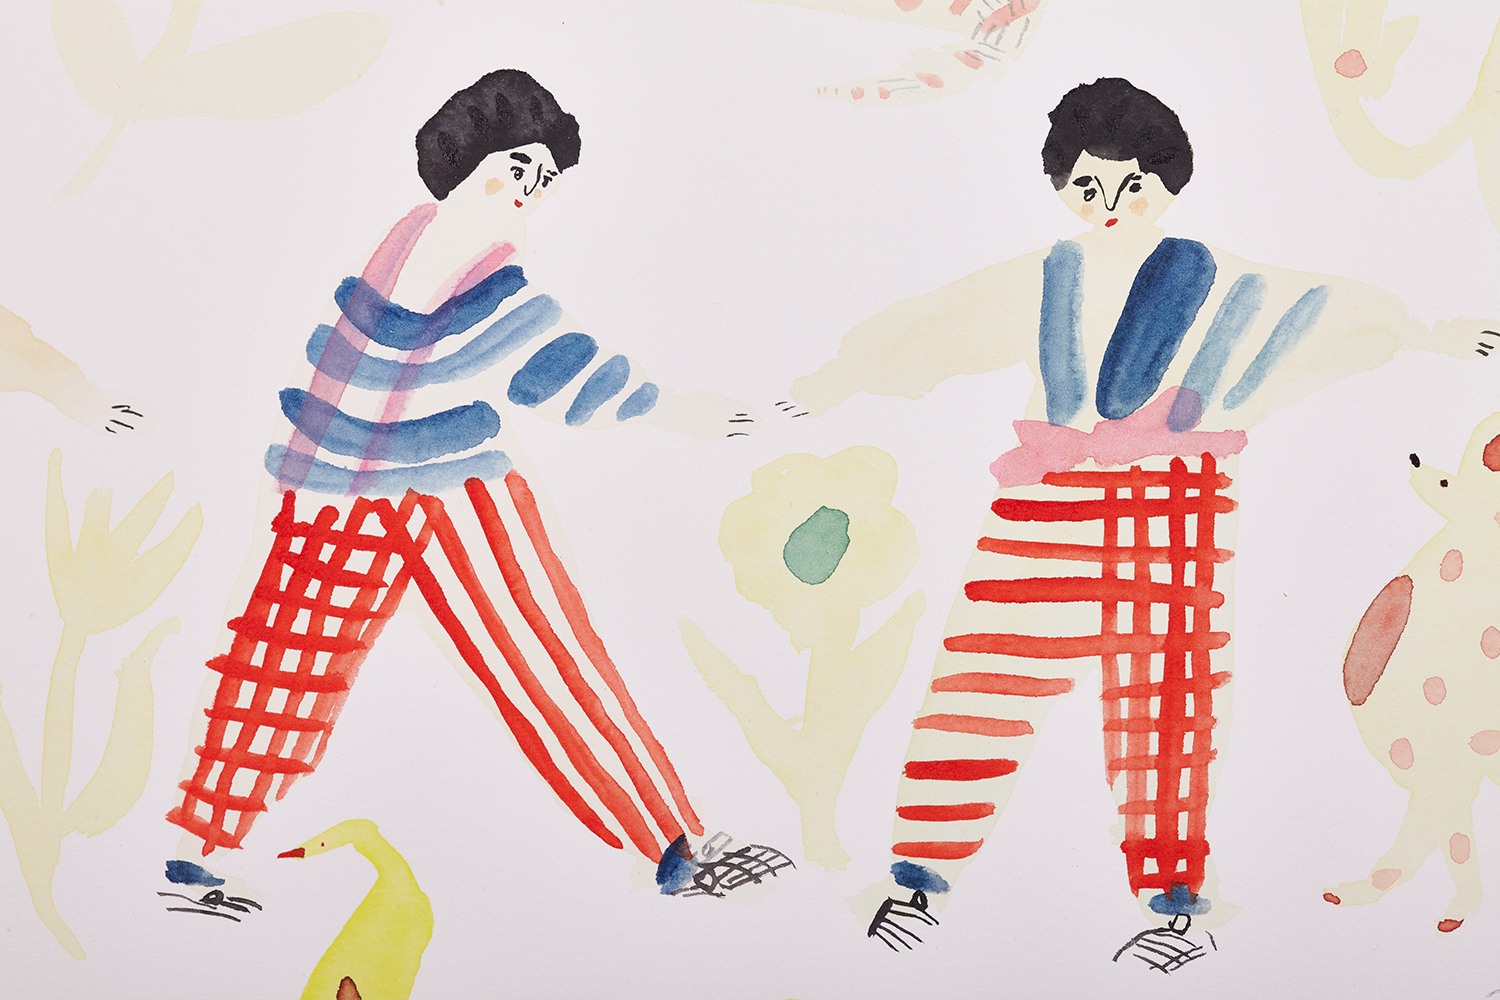   Japanese Villagers, detail   Watercolor and gouache on paper, 2017  22” x 30”  $1500  Available 